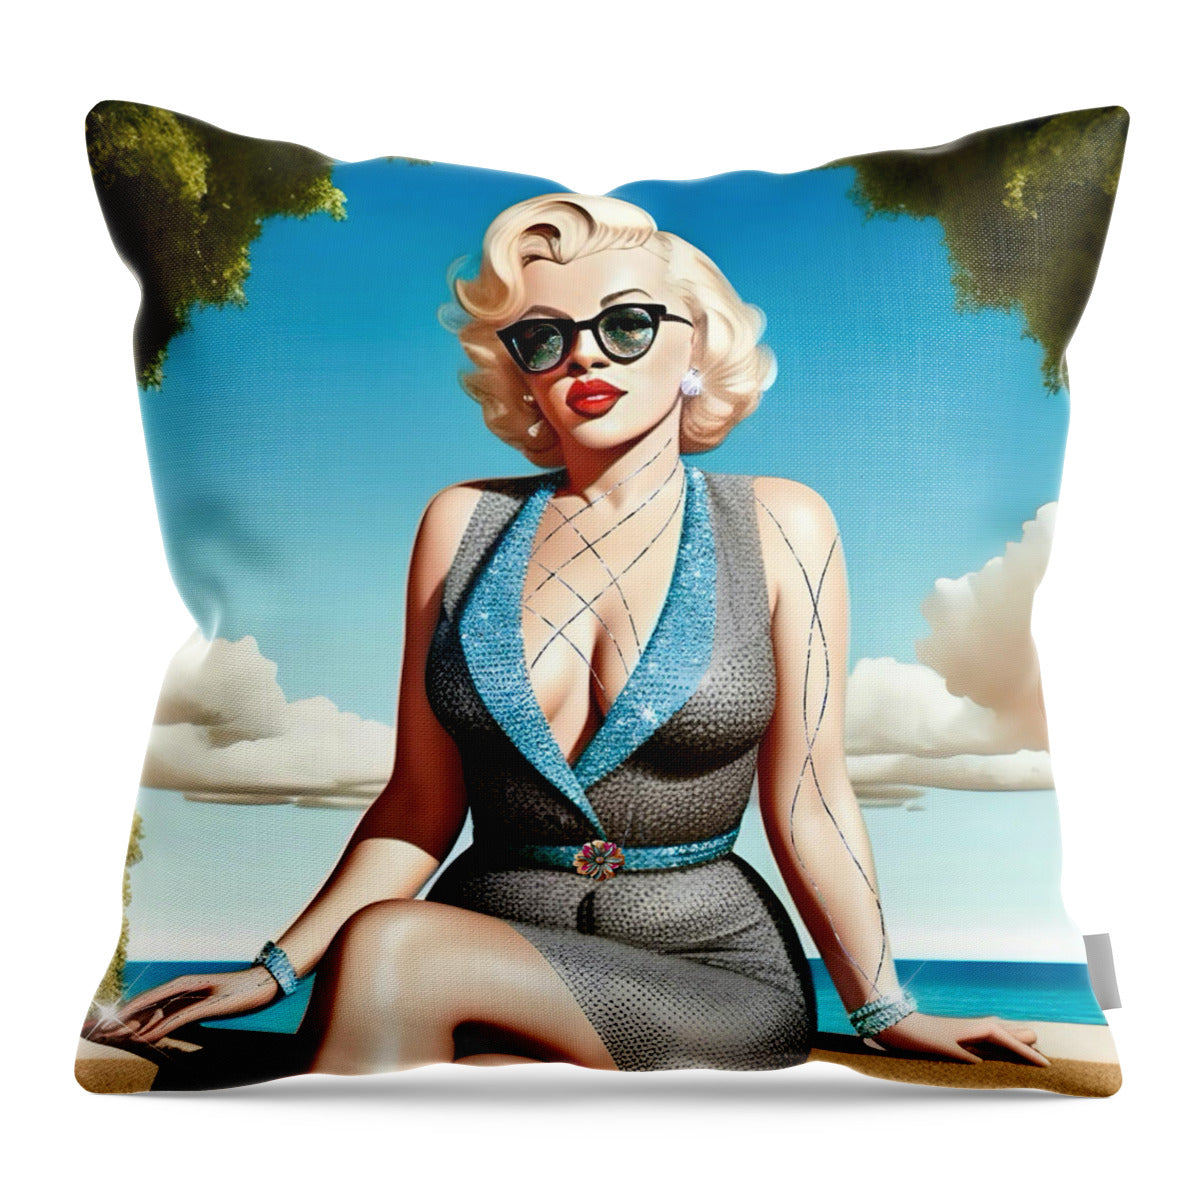 Just Waiting On a Friend - Throw Pillow